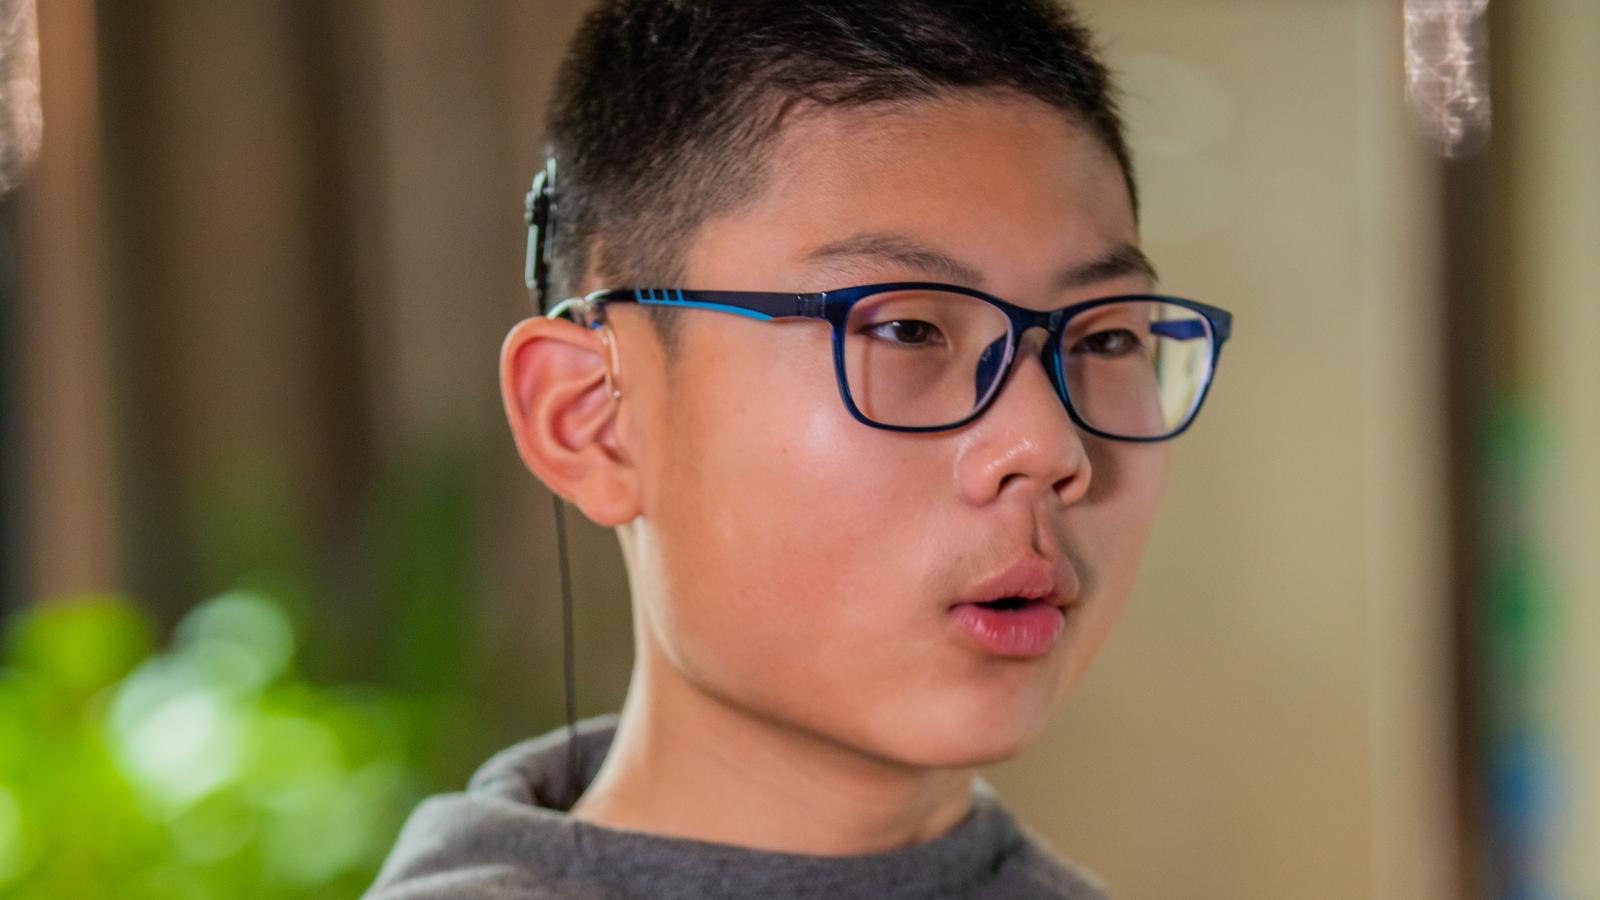 A boy wearing an implant practices his speech therapy